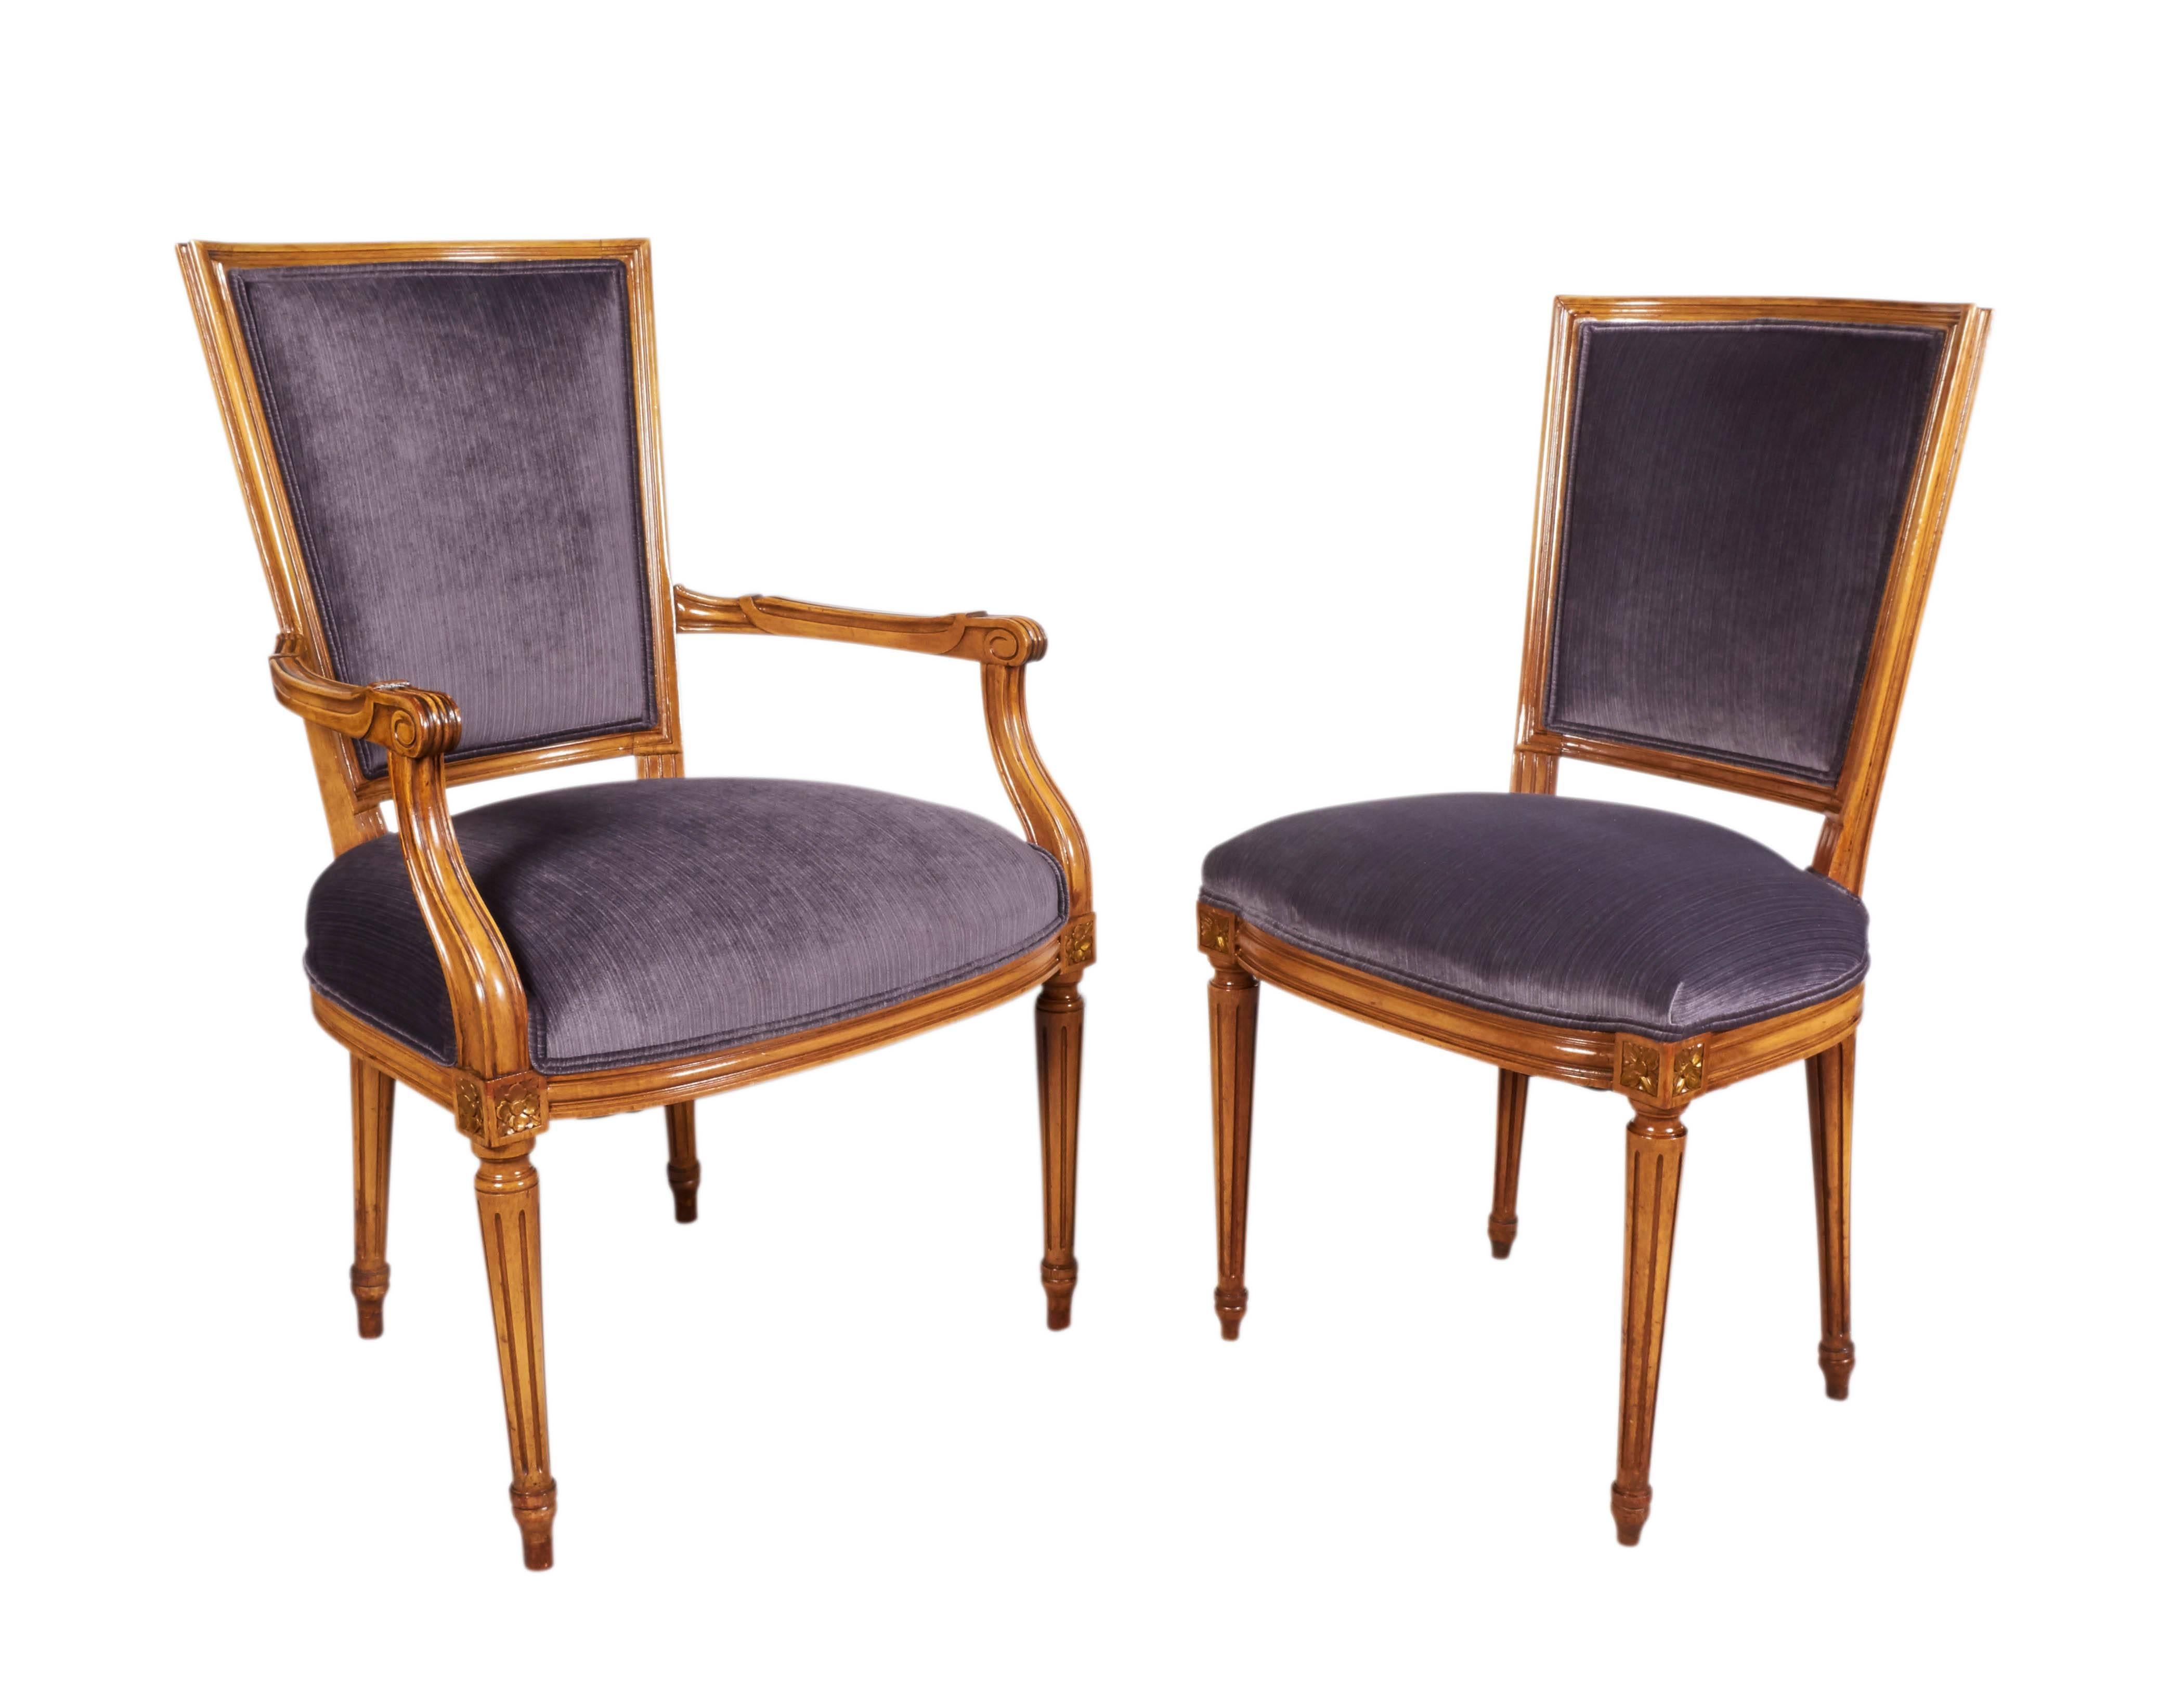 A set of six Louis XVI style dining chairs by Maison Jansen, comprising two-arm and four-side, produced in France, circa 1940s, each with backs and seats upholstered in lavender grey colored strie velvet, against carved wood frames. Excellent